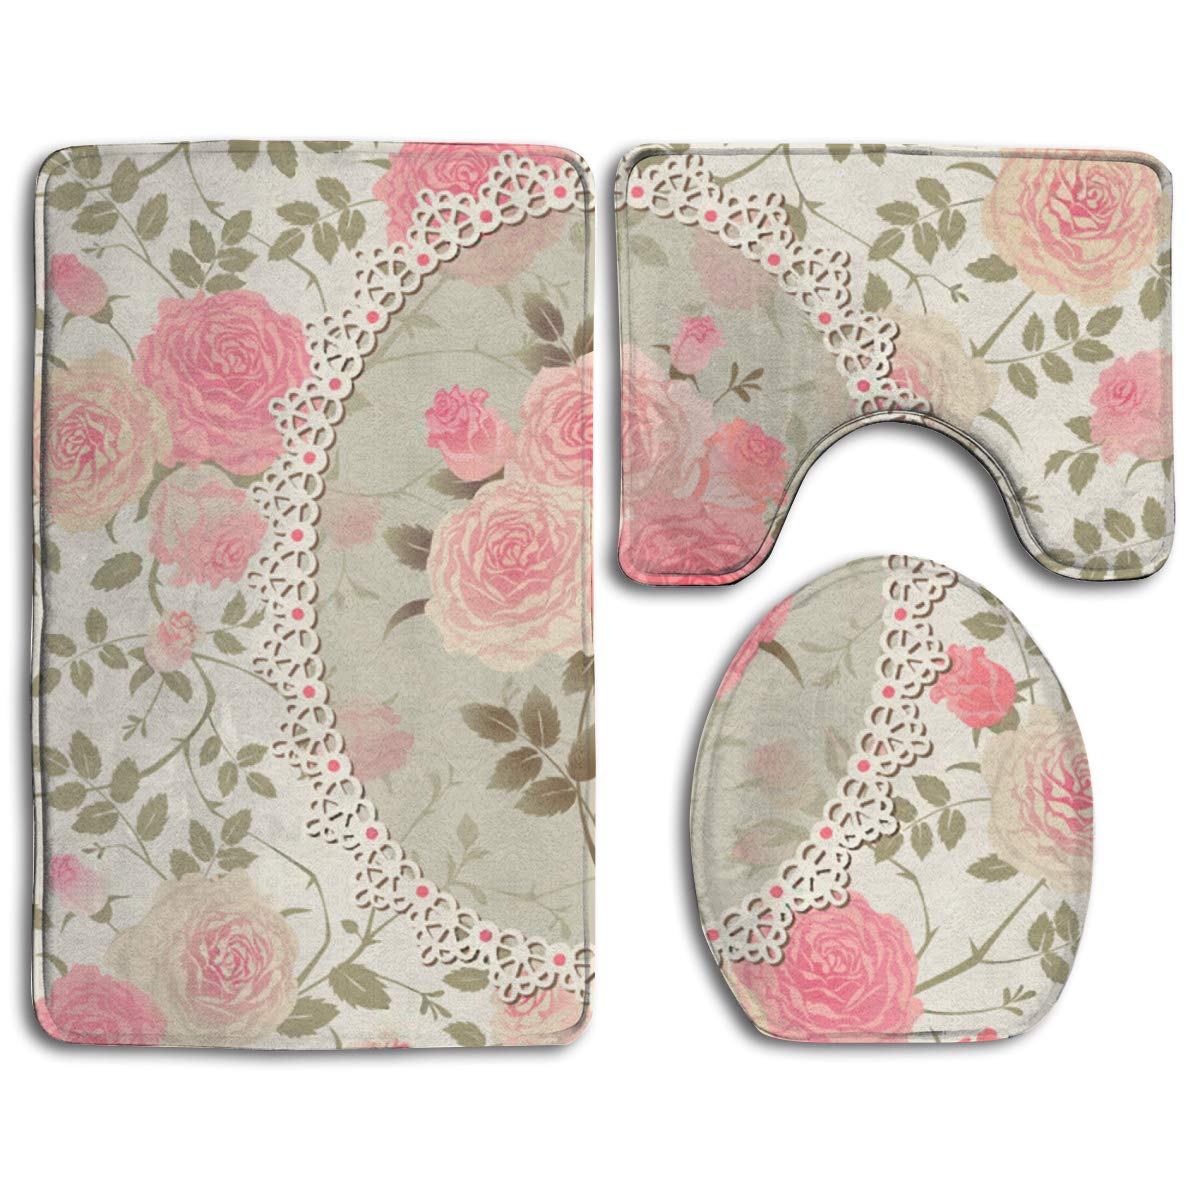 Farmhouse Bathroom Rug Washable Non Slip for Tub Show Bath Mat Set Large Pink Flowers Inflorescences Buds and Lotus 2 Piece Area Rug Set Includes Toilet Oval U-Shape Contoured Mat and Bathroom Rugs